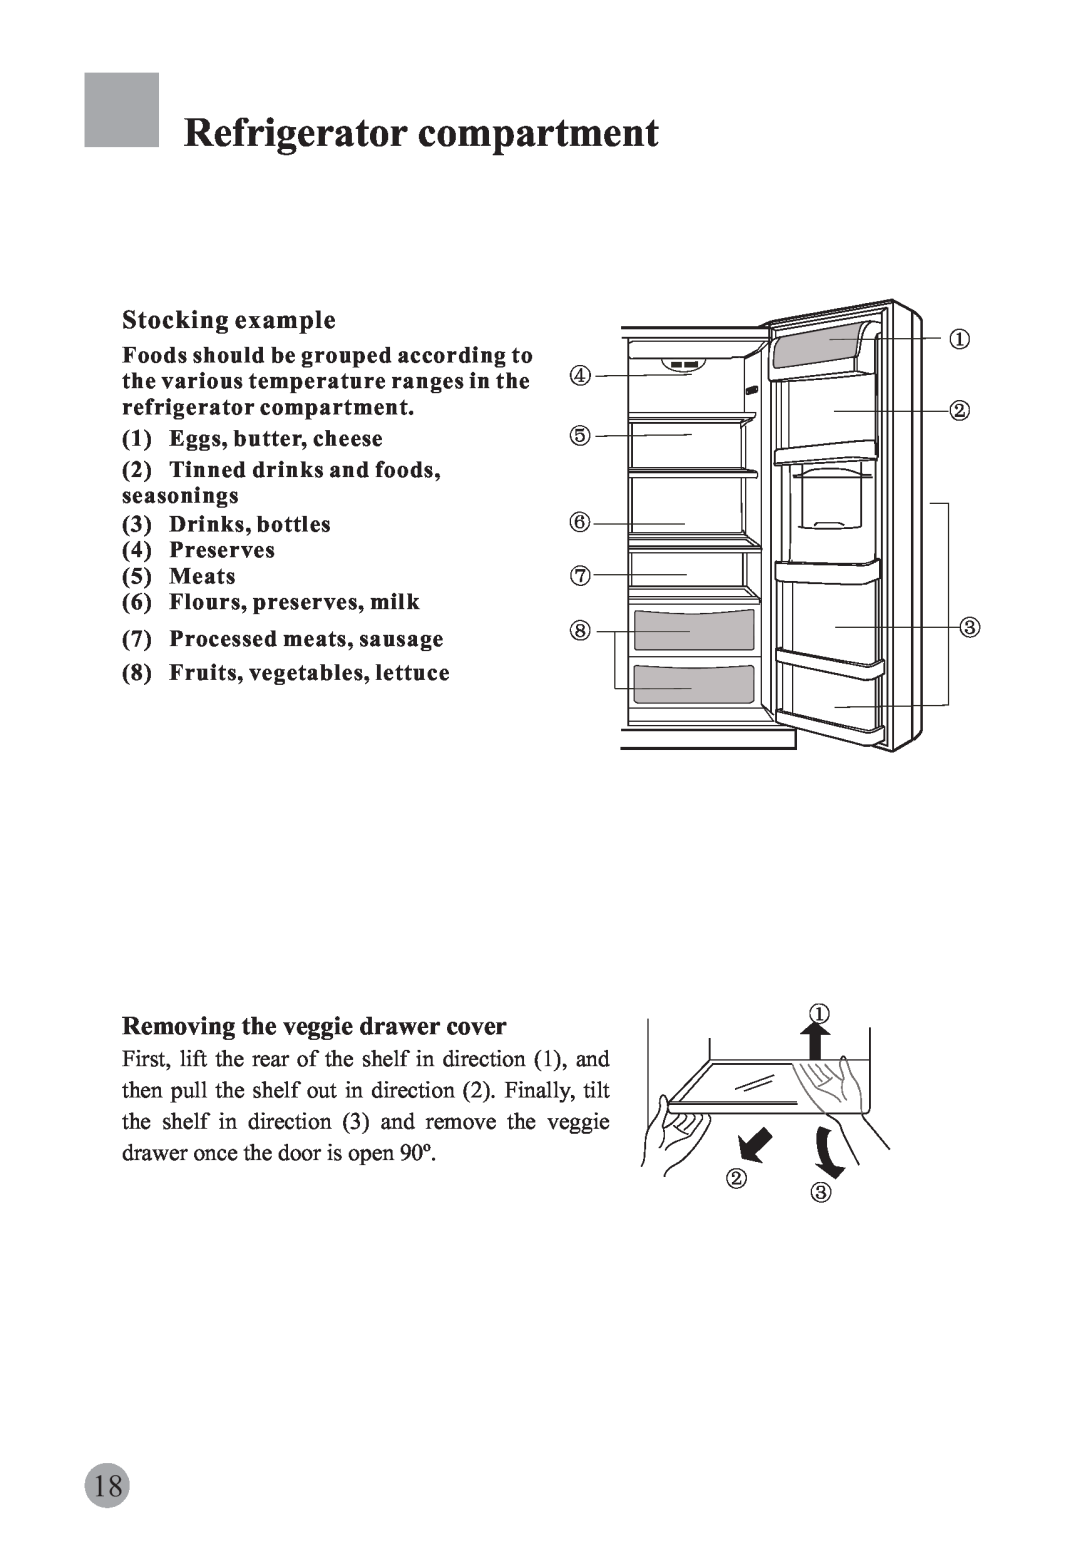 Haier HRF-661TSAA manual Stocking example, Removing the veggie drawer cover, Refrigerator compartment, Eggs, butter, cheese 